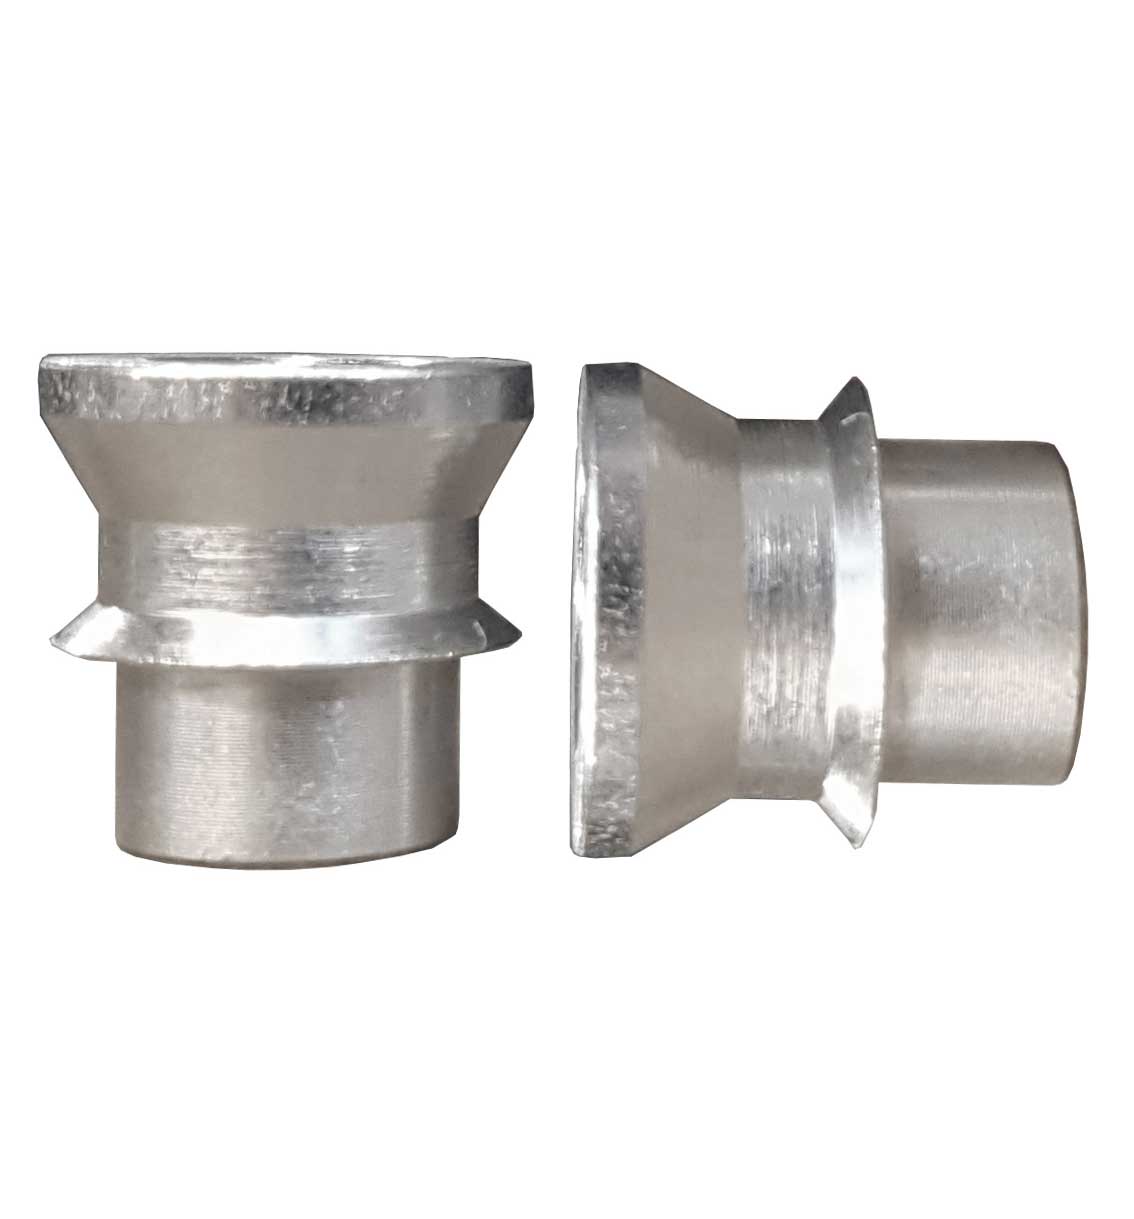 1/2" to 3/8" Rod End Misalignment Reducers (Long)